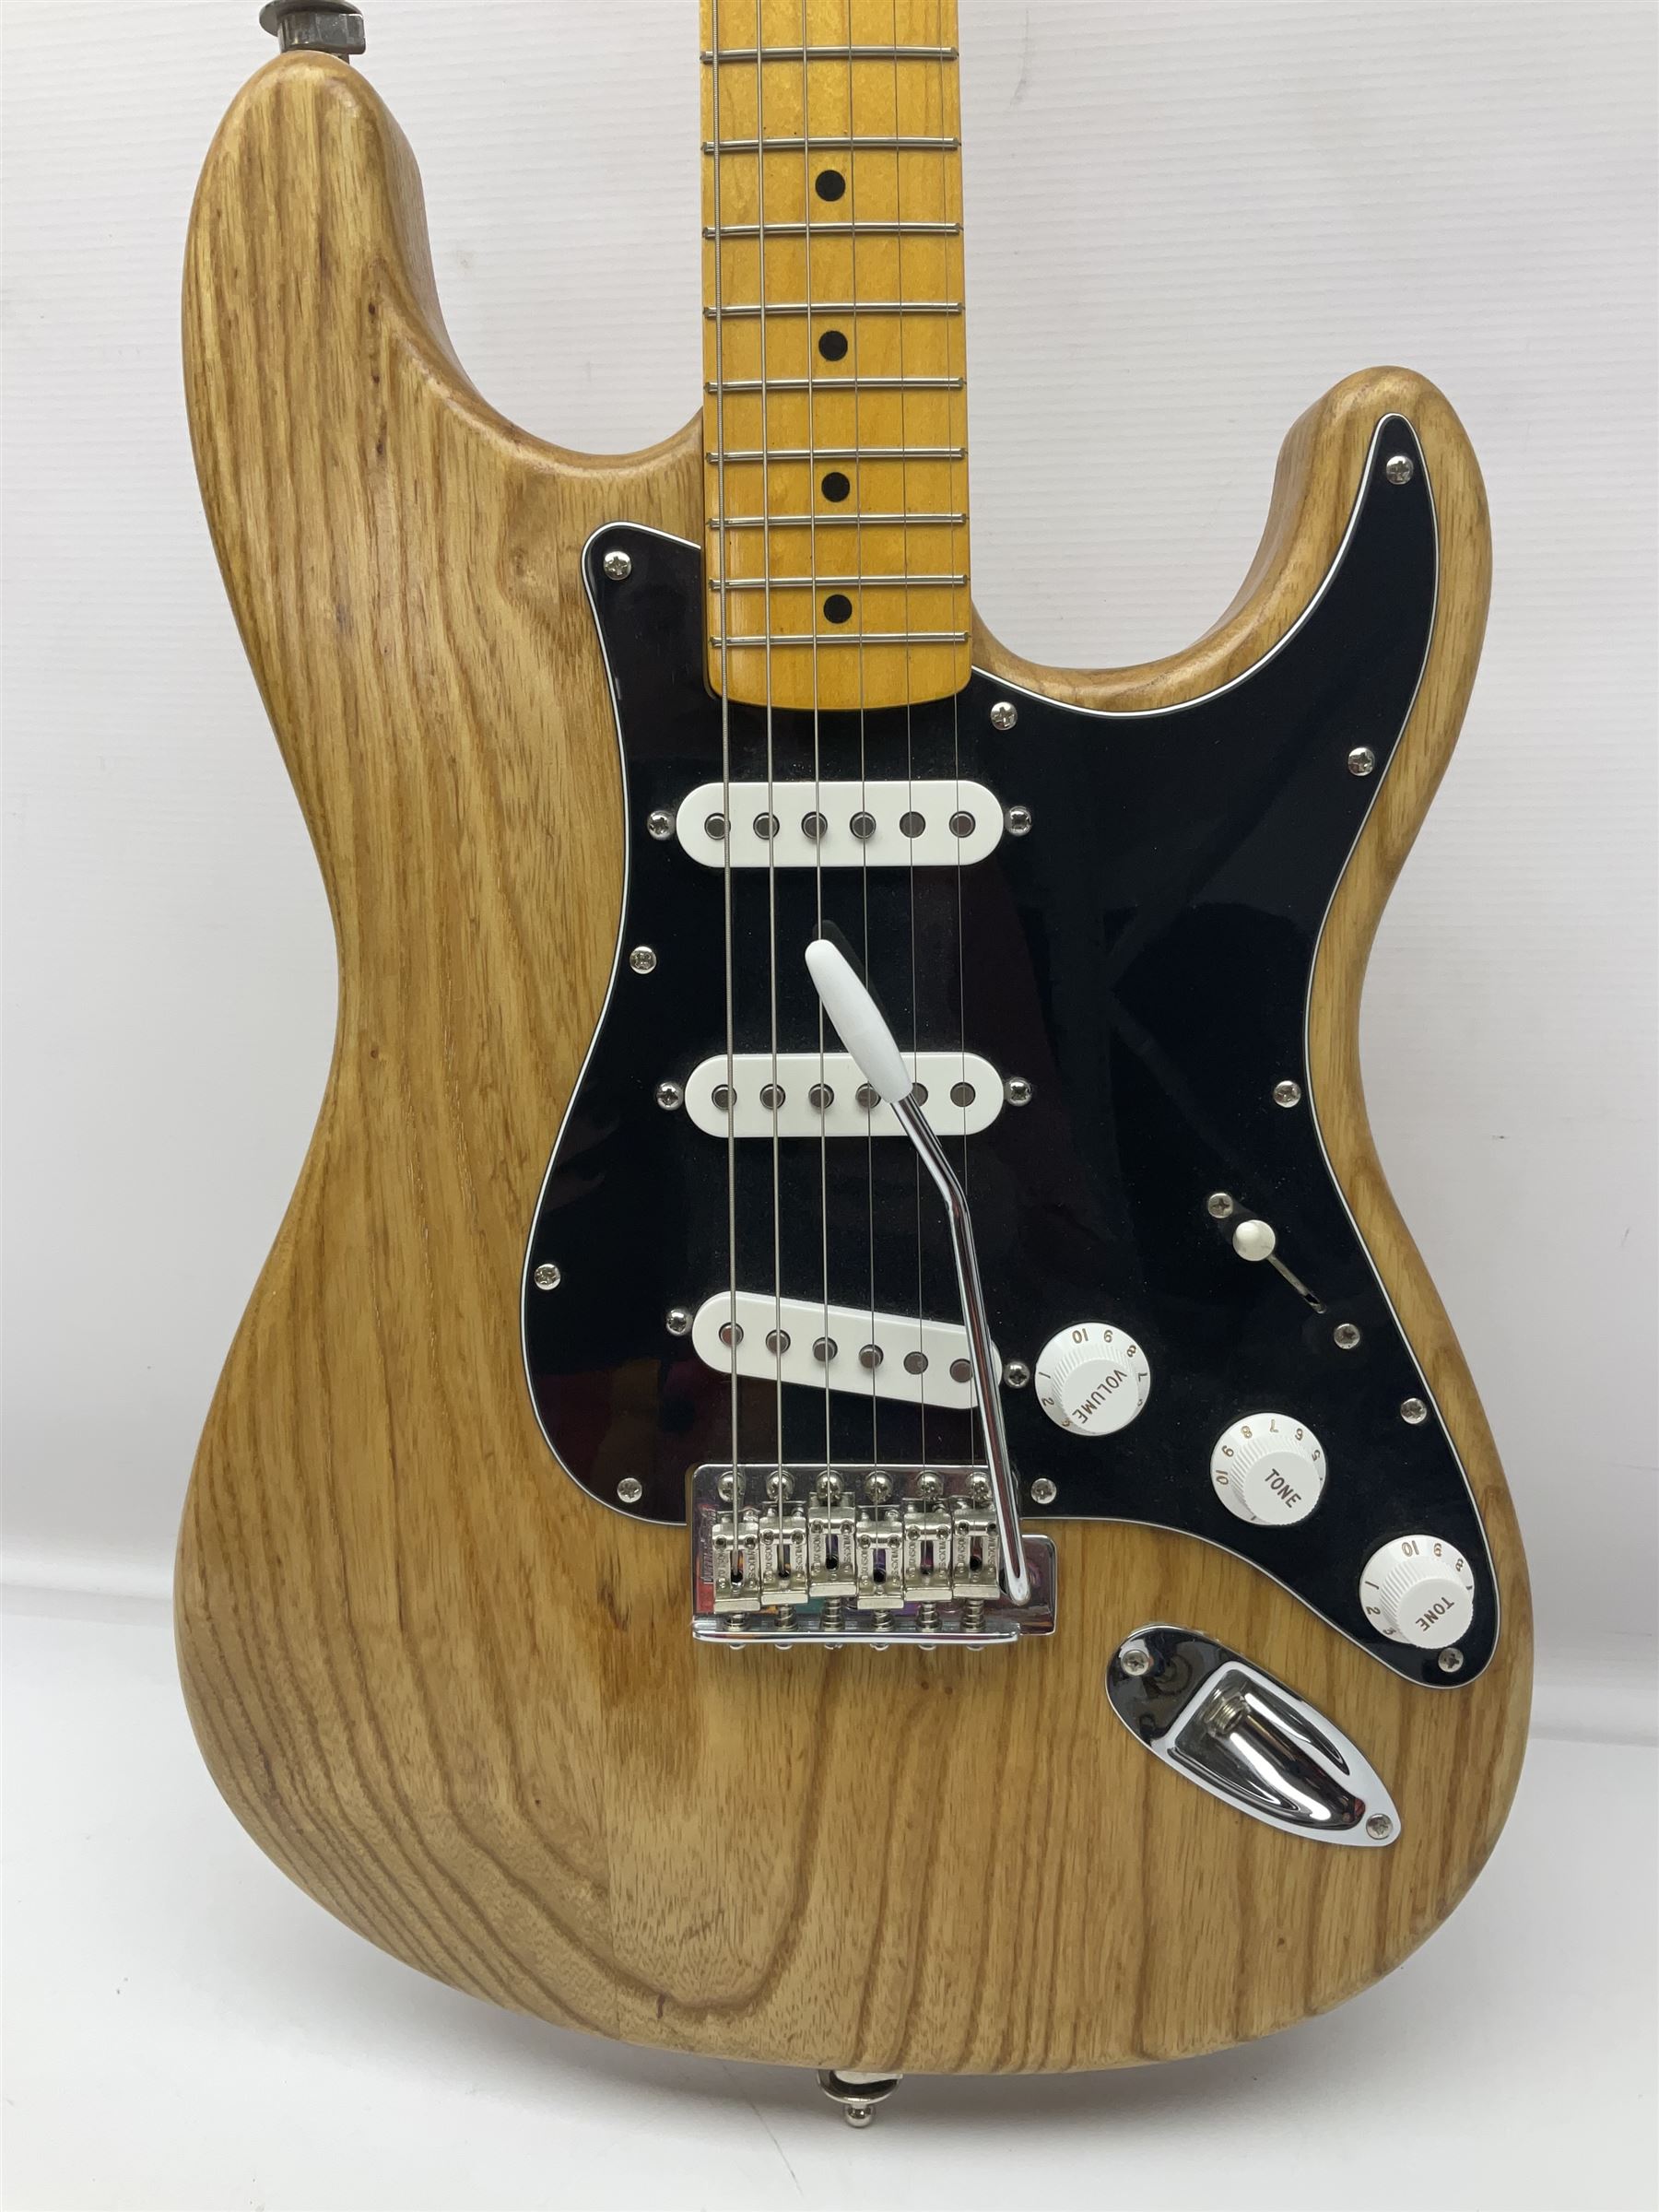 Fender Stratocaster copy electric guitar with natural two-piece ash body - Image 7 of 17